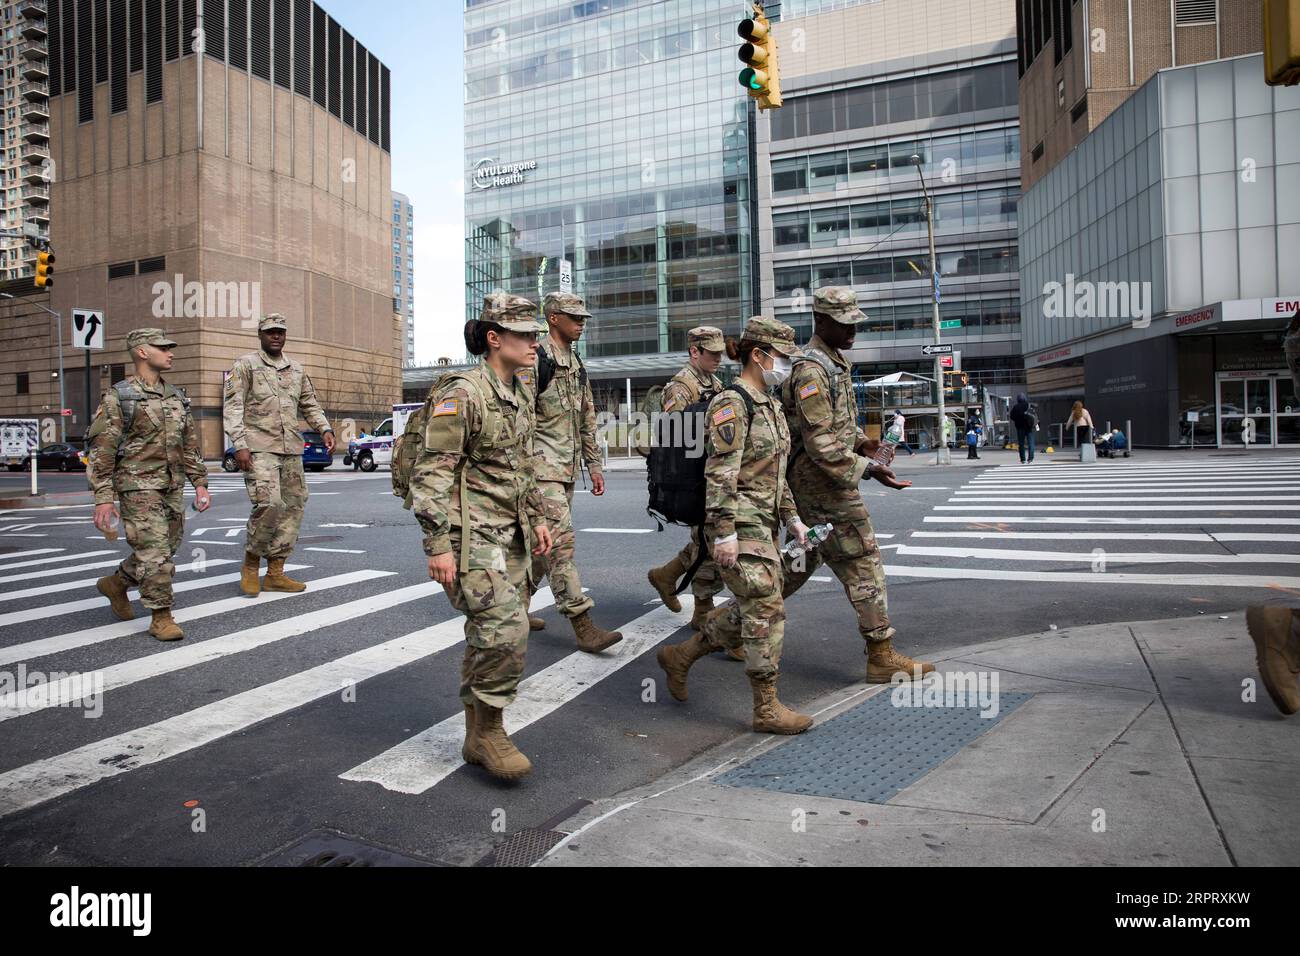 200409 -- NEW YORK, April 9, 2020 Xinhua -- Soldiers cross a street in front of NYU Langone Medical Center during the coronavirus pandemic in New York, the United States, April 8, 2020. The number of COVID-19 cases in the United States reached 401,166 as of 12:20 local time on Wednesday 1620 GMT, according to the Center for Systems Science and Engineering CSSE at Johns Hopkins University. A total of 12,936 deaths were reported in the nation, according to the CSSE. Photo by Michael Nagle/Xinhua U.S.-NEW YORK-COVID-19 PUBLICATIONxNOTxINxCHN Stock Photo